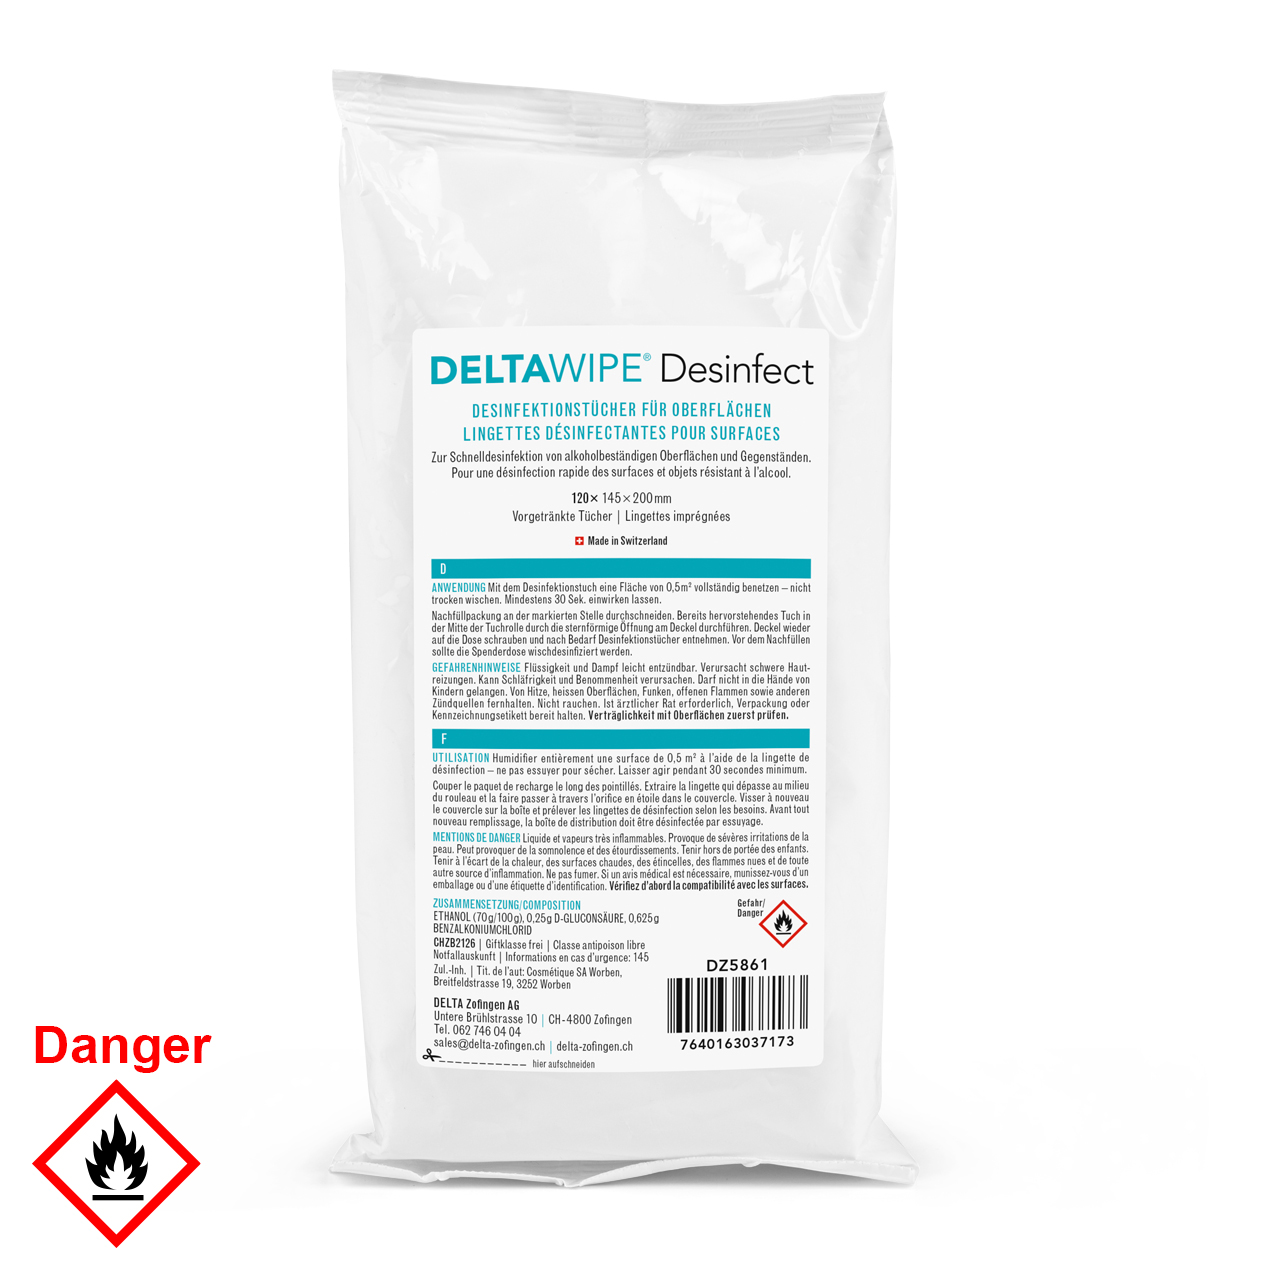 DELTAWIPE® Desinfect Refill